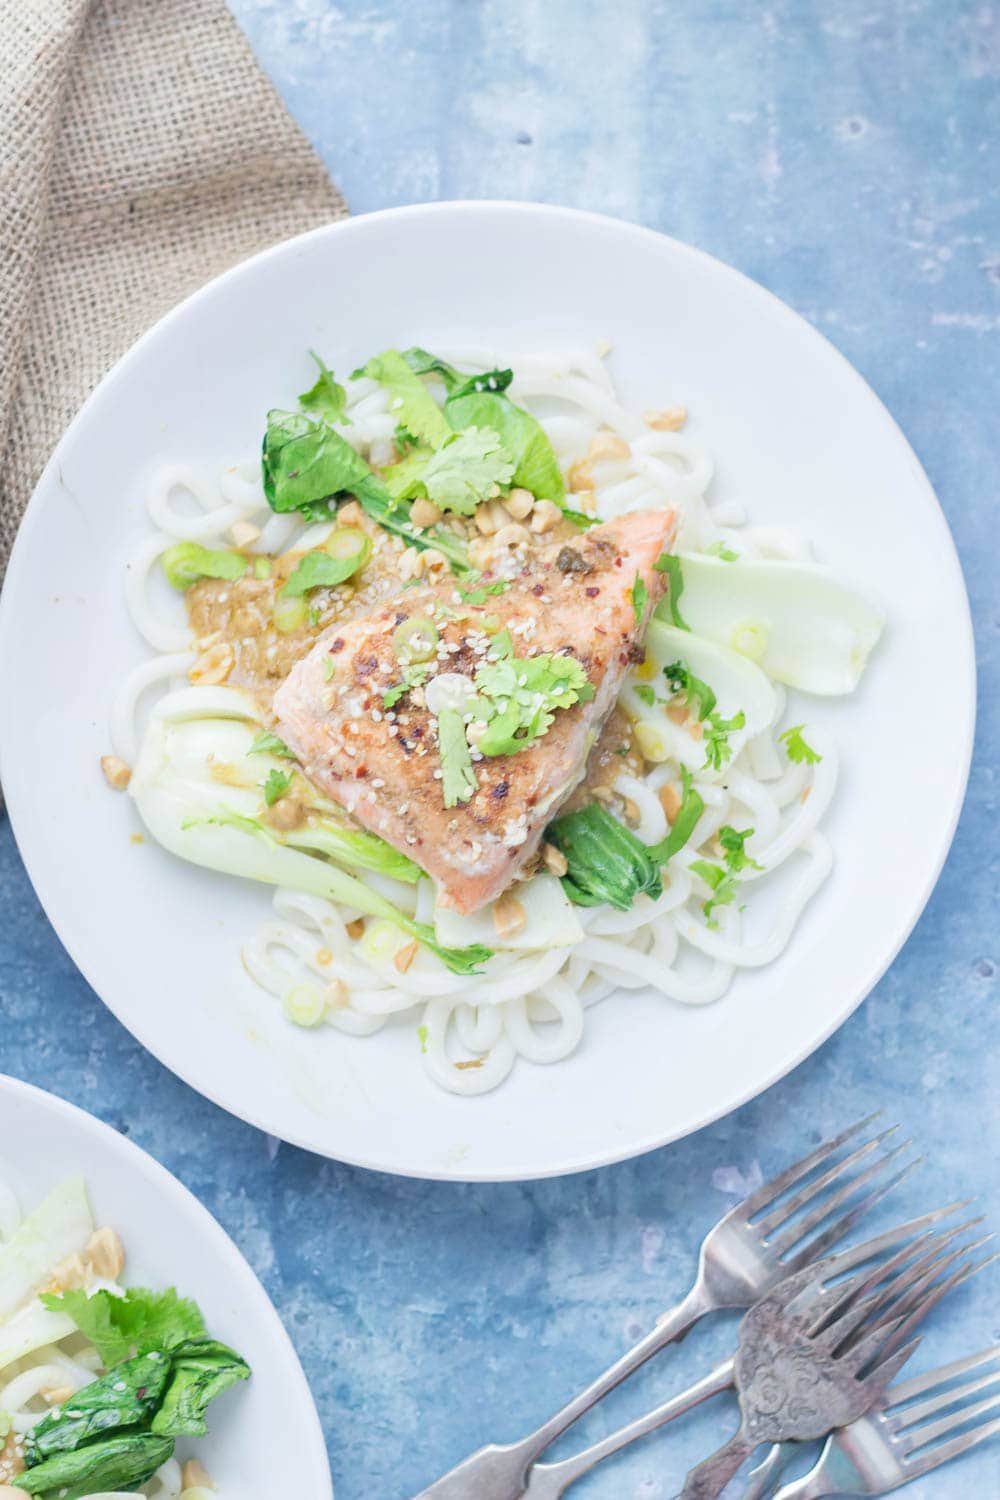 Peanut Salmon Udon Noodles with Pak Choi. The sauce on this peanut salmon is to die for! Perfectly flaky salmon sits on top of udon noodles and wilted pak choi with a creamy peanut sauce. #salmon #udonnoodles #recipe #dinner